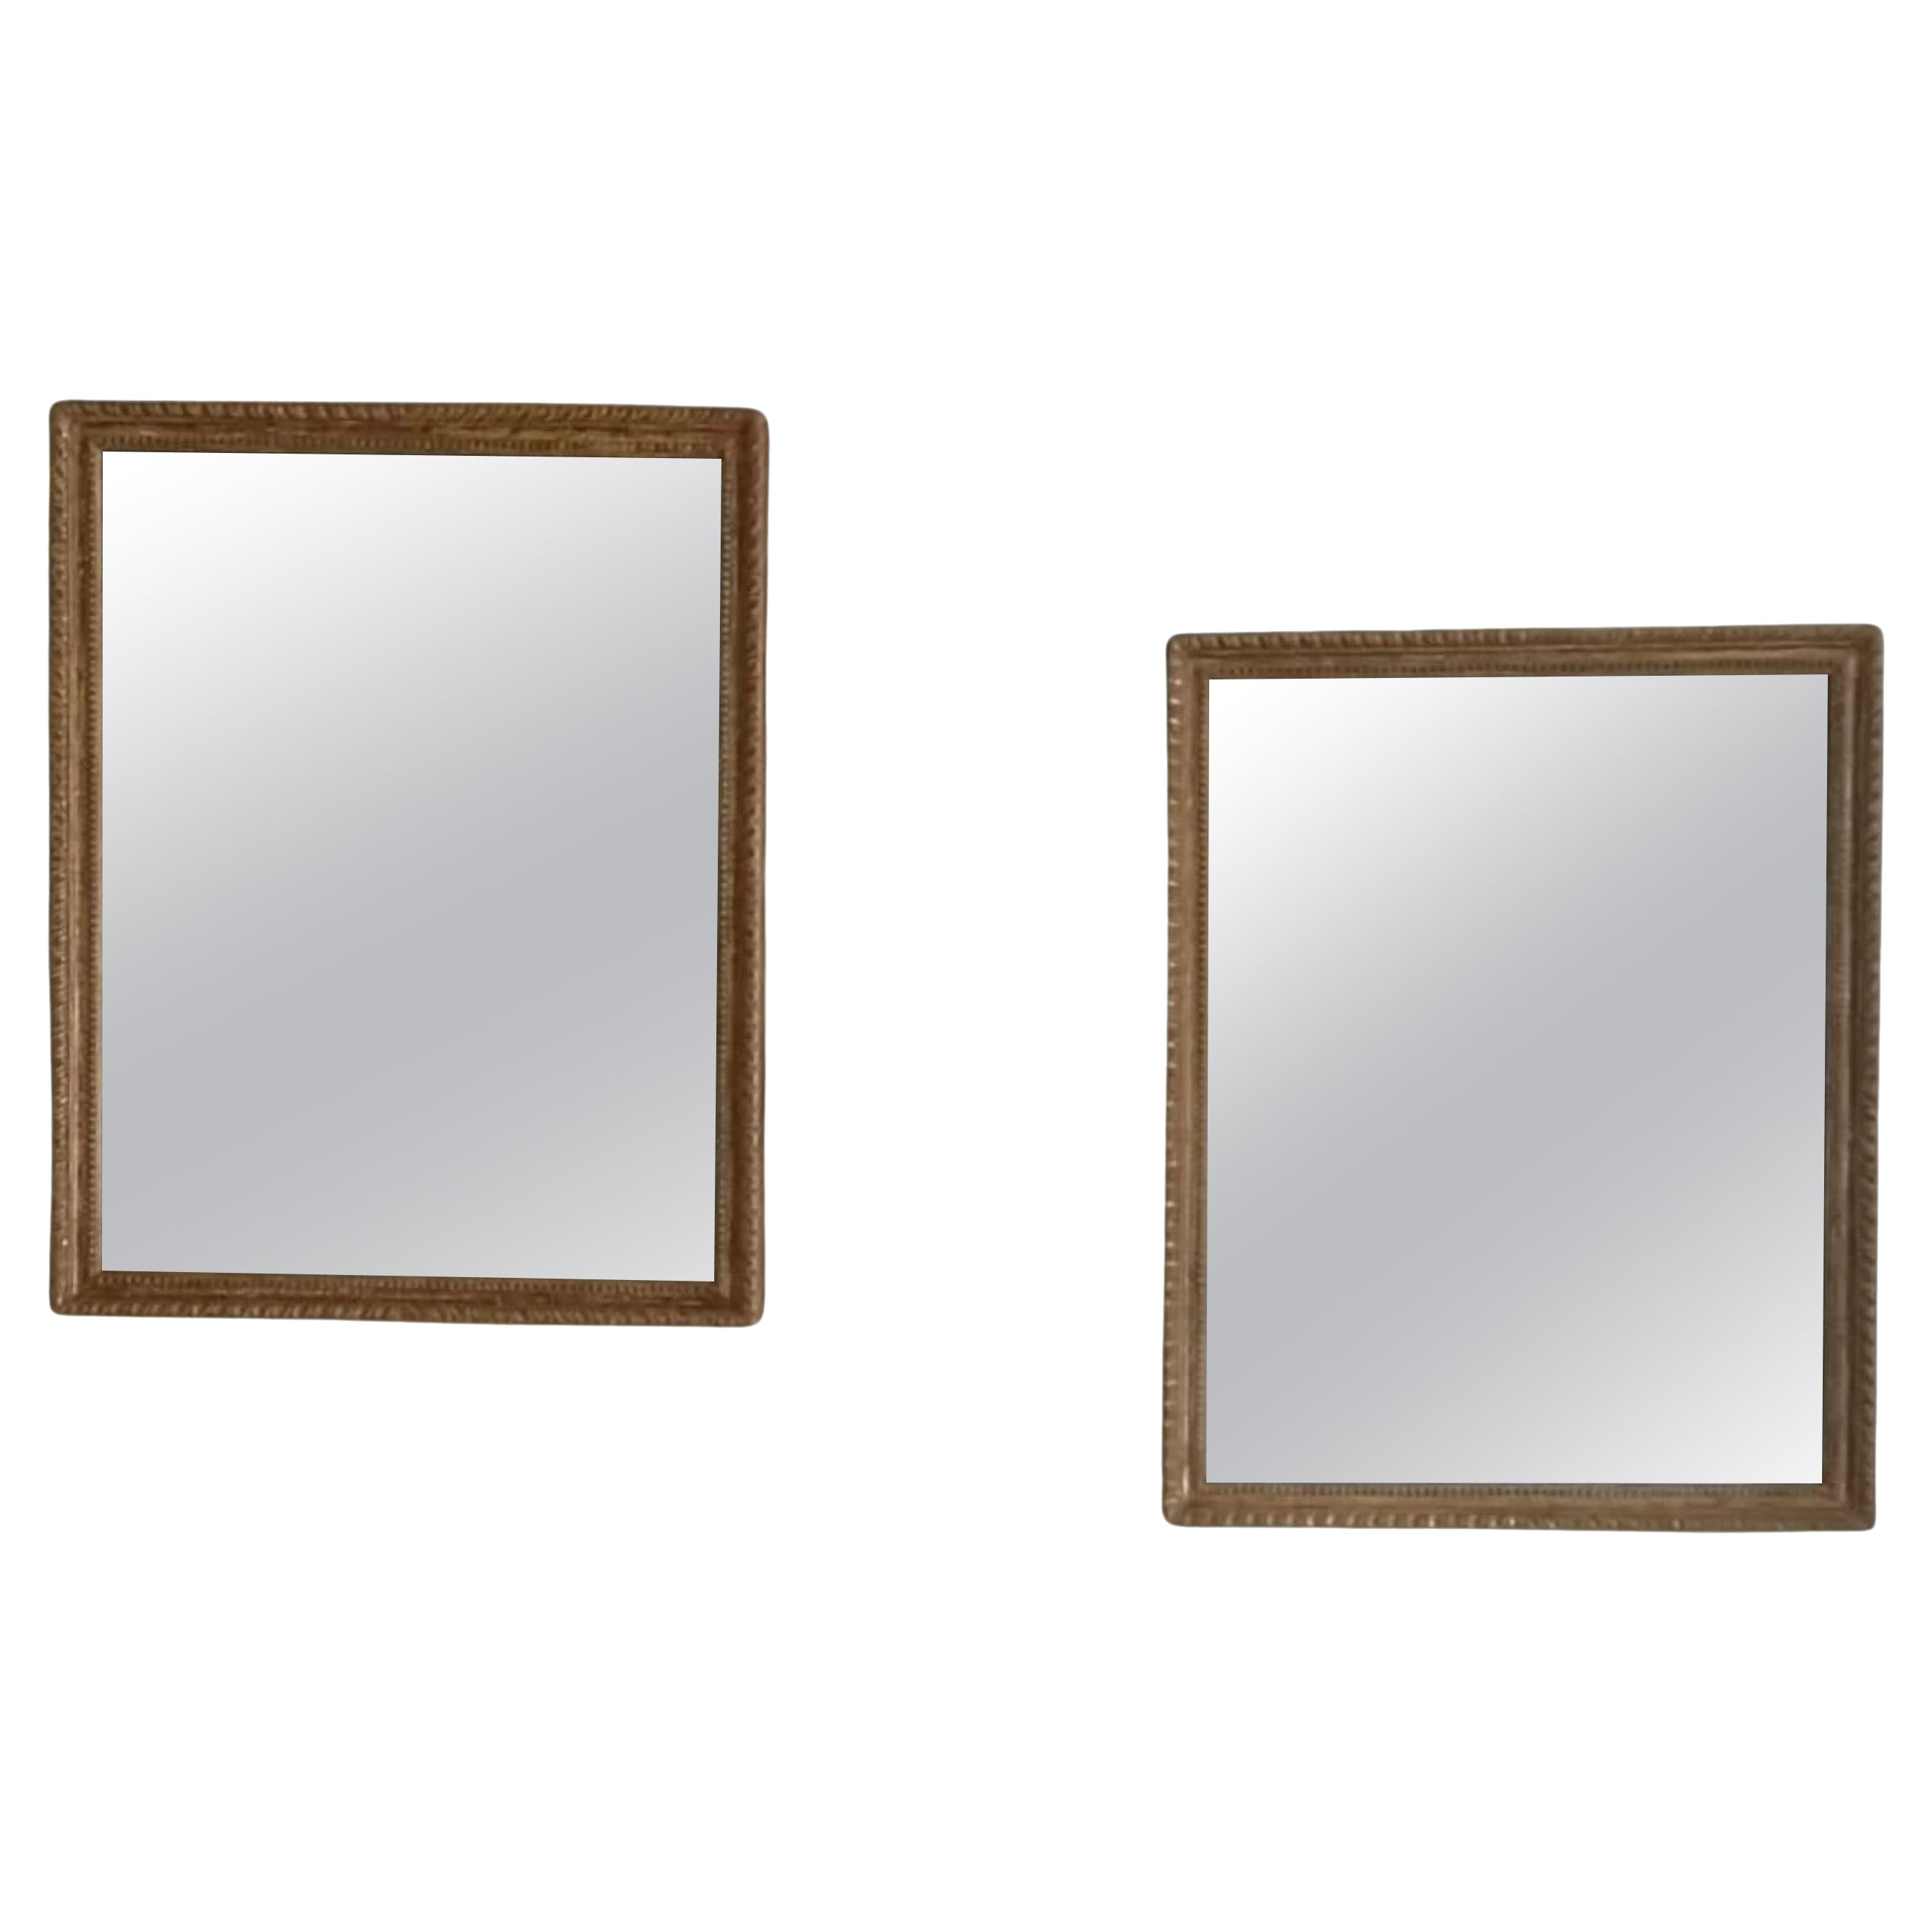 Pair of 18th Century Rectangular Giltwood Mirrors For Sale